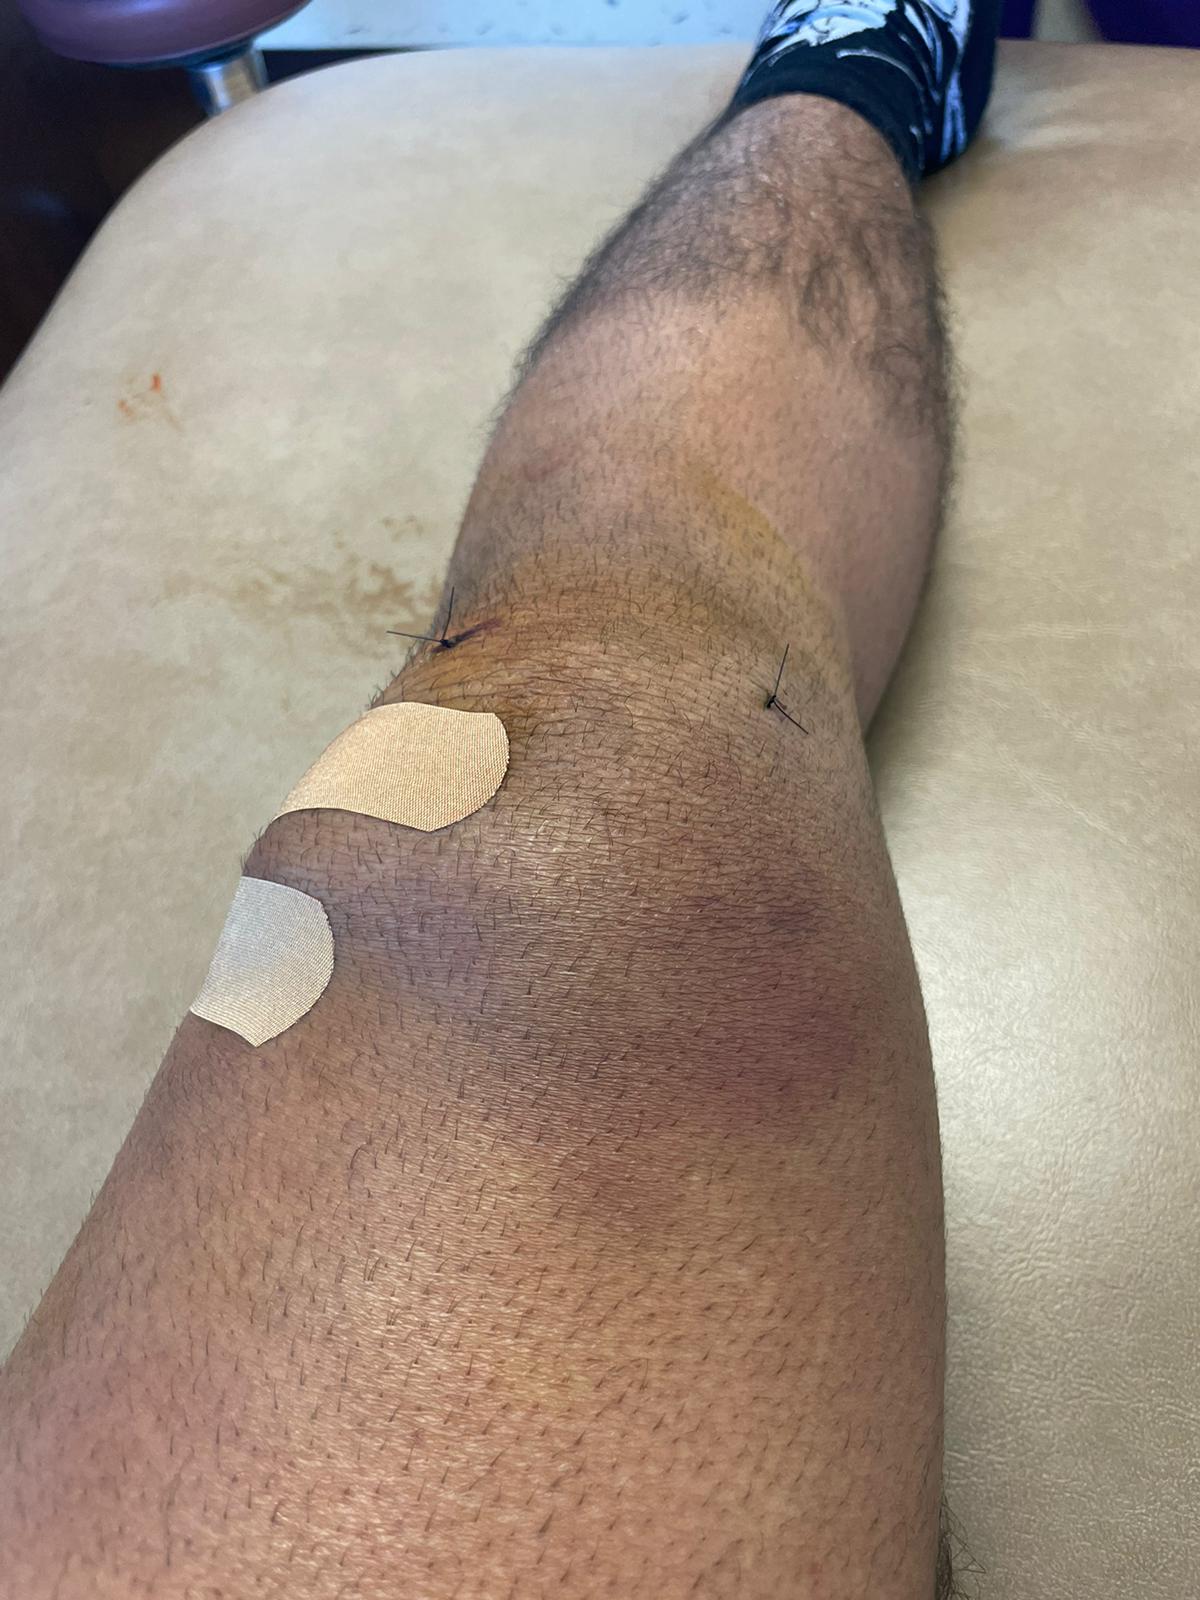 Knee after fluid was drained